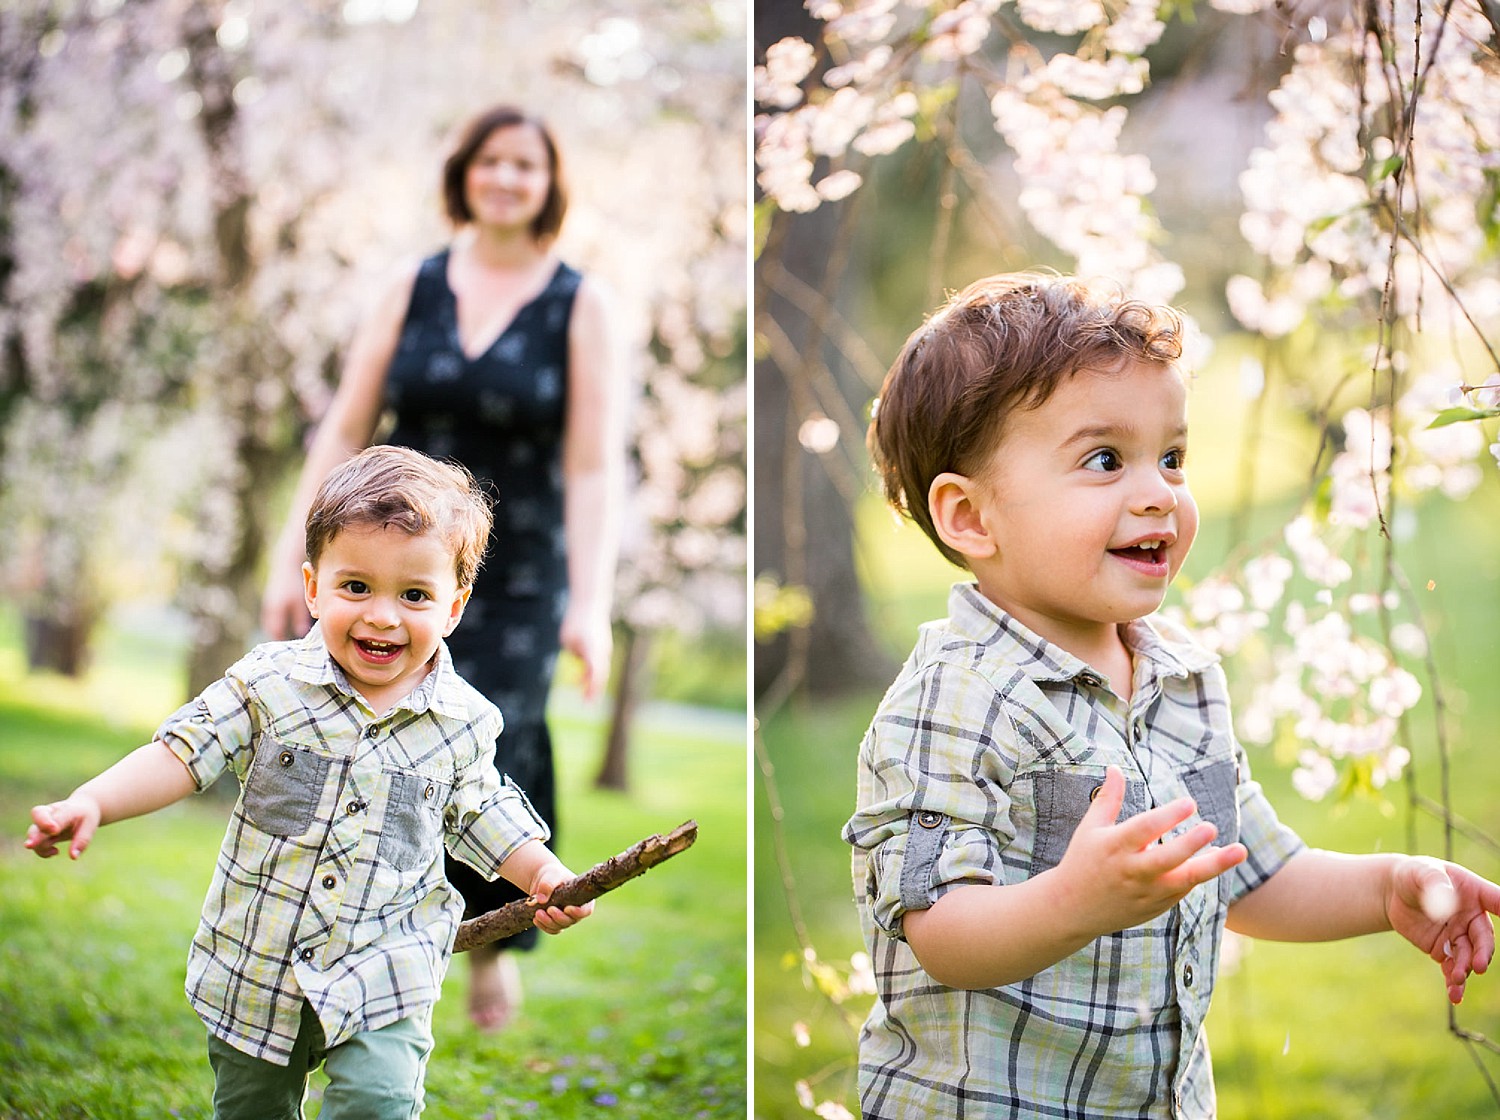  Toddler boy playing in some cherry tree blossoms at a park with his mother. 